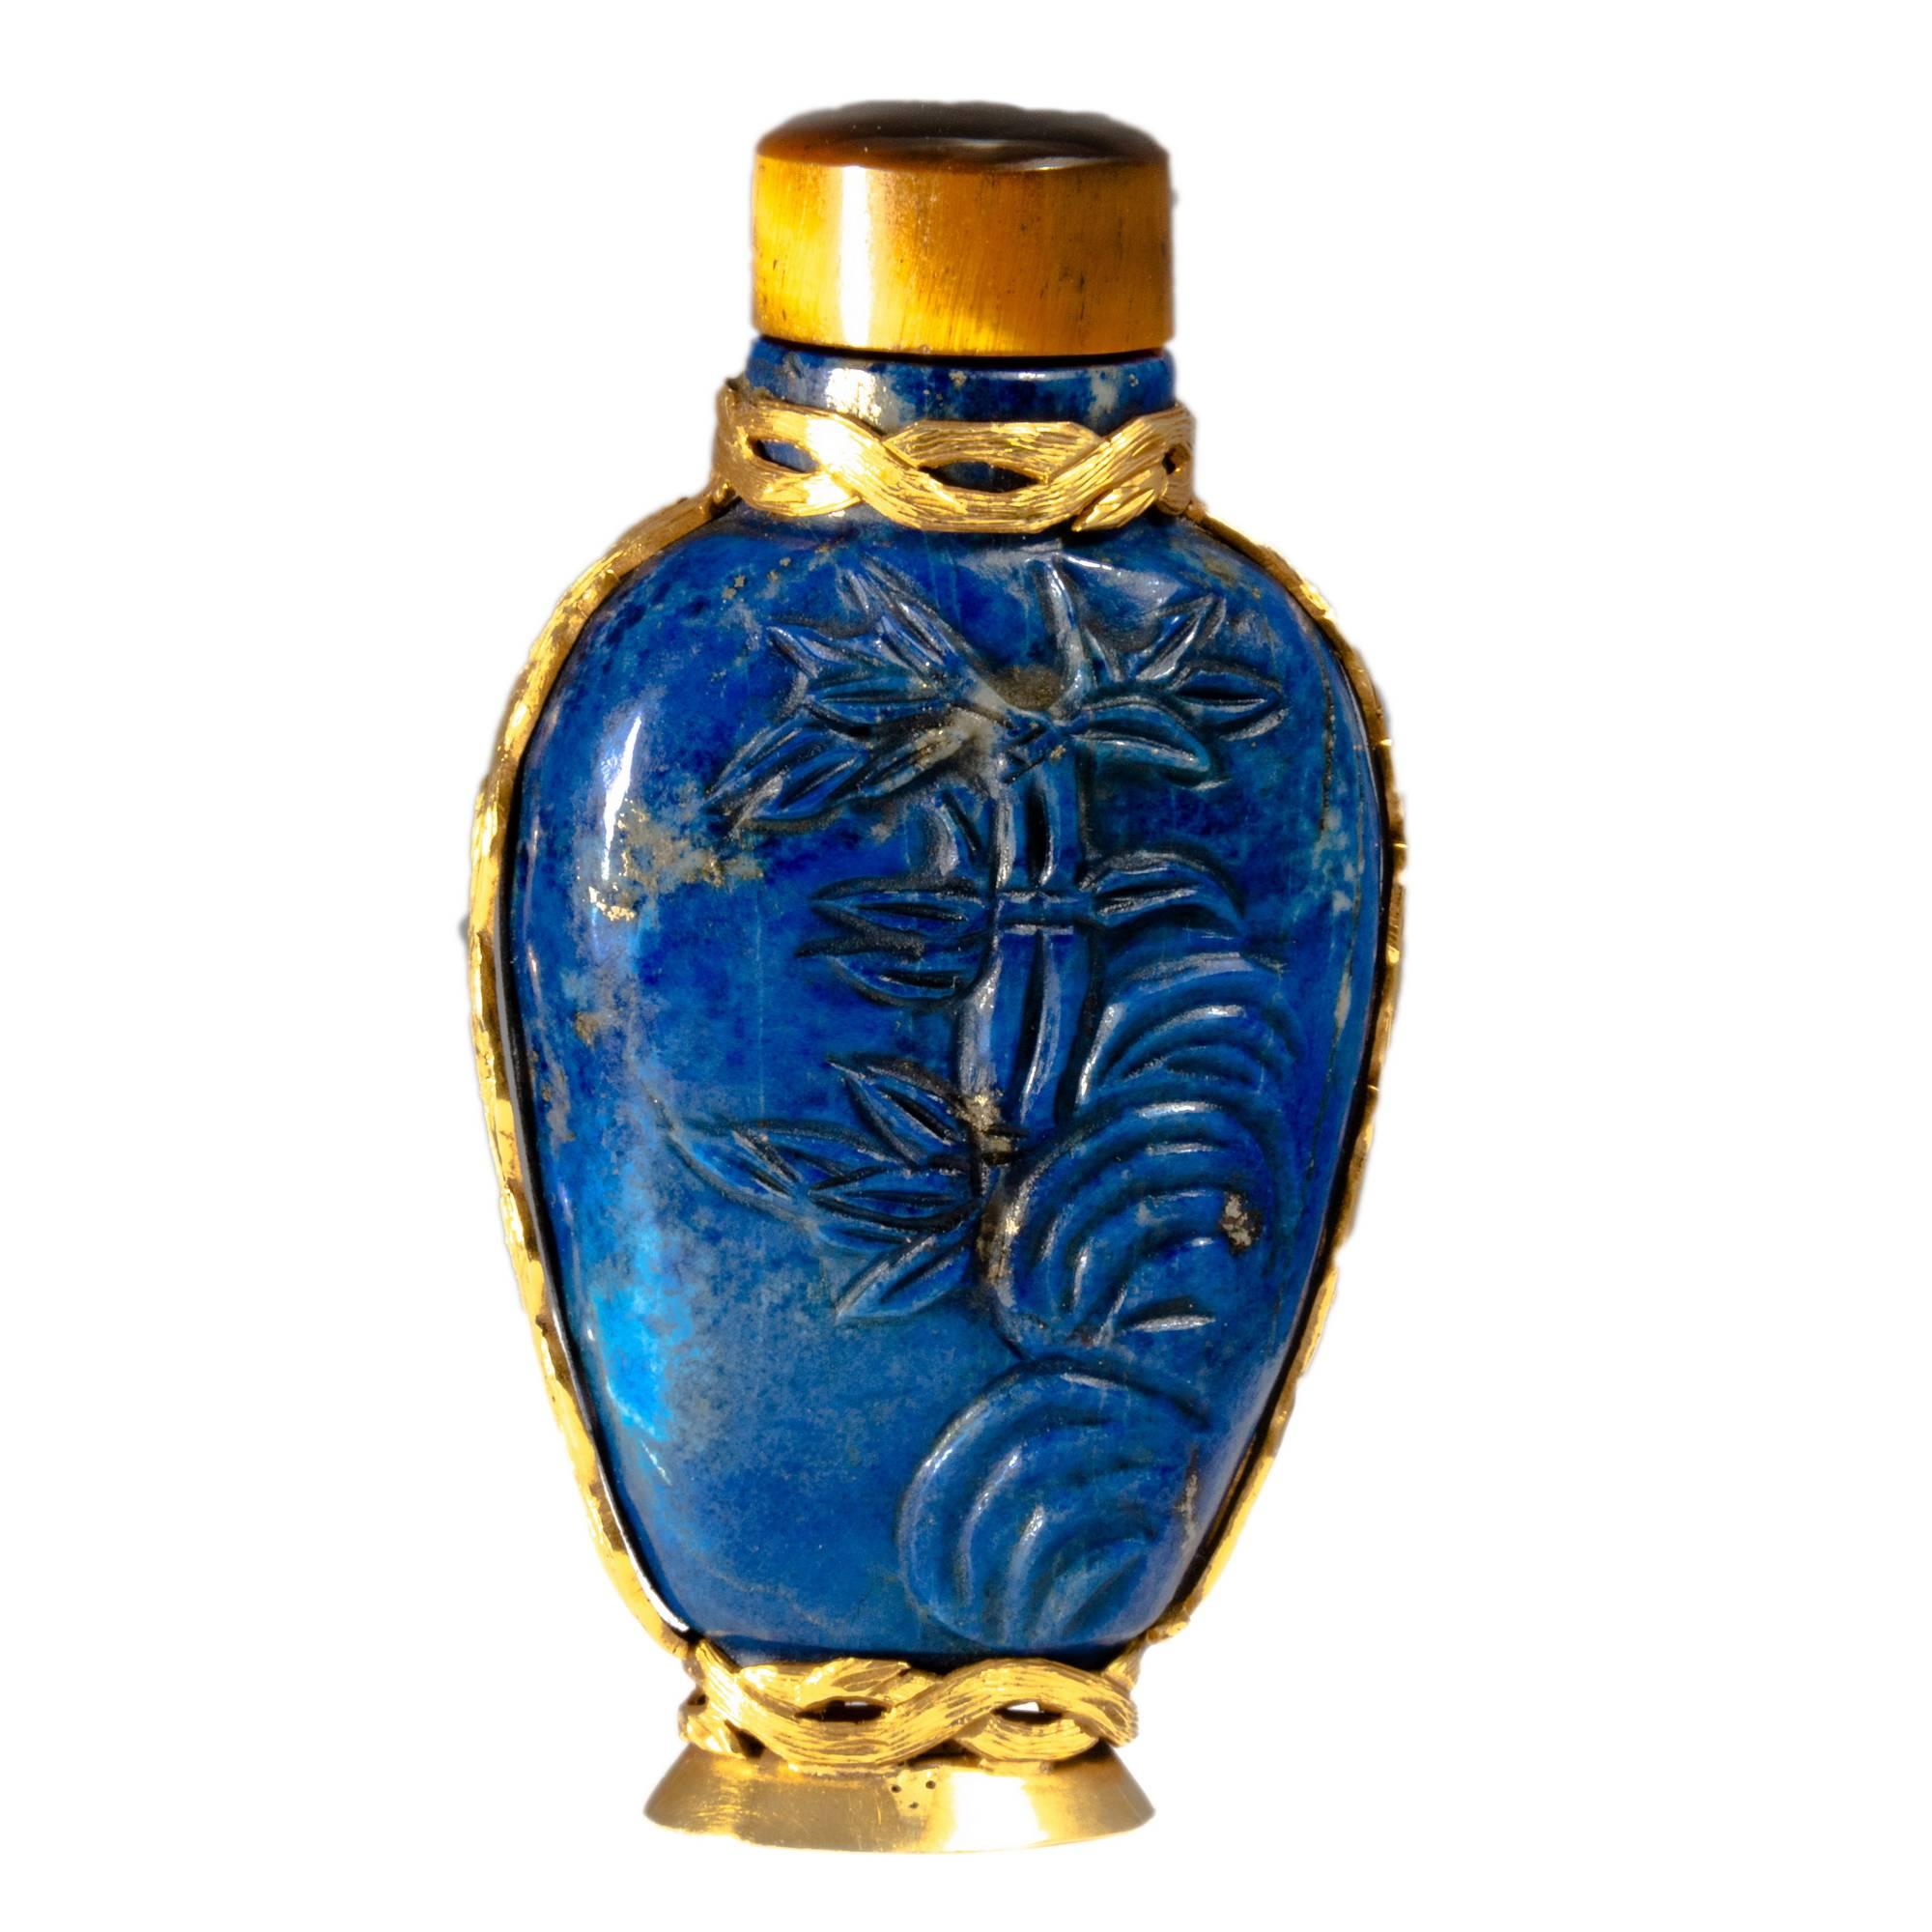 This early XX century rare lapis lazuli snuff bottle is unique and precious. Entirely hand-crafted from a beautiful block of lapis lazuli, it features an elegant ramage decoration on both sides of the bottle. The fine decorations on the lapis lazuli